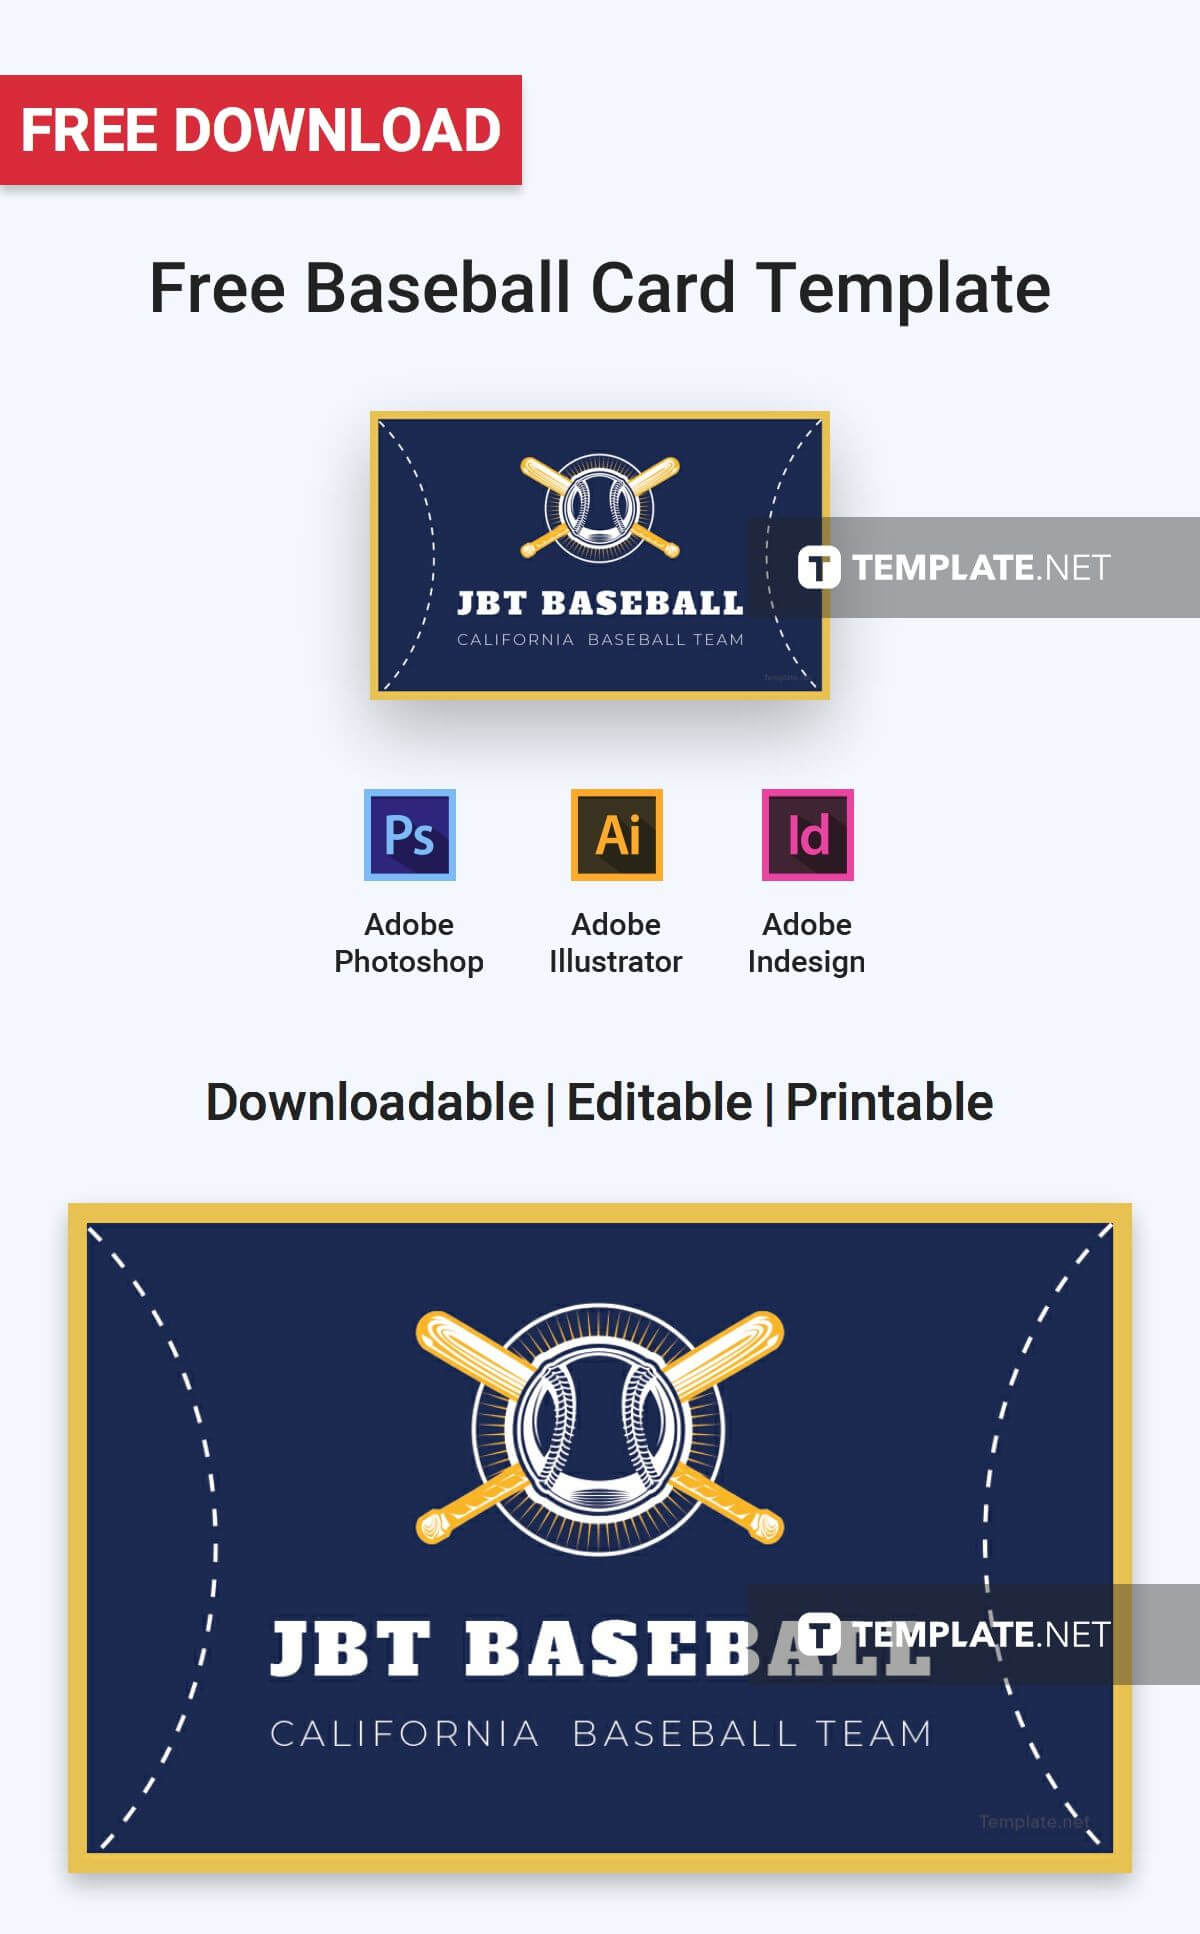 Free Baseball Card | Card Templates & Designs 2019 With Baseball Card Template Word